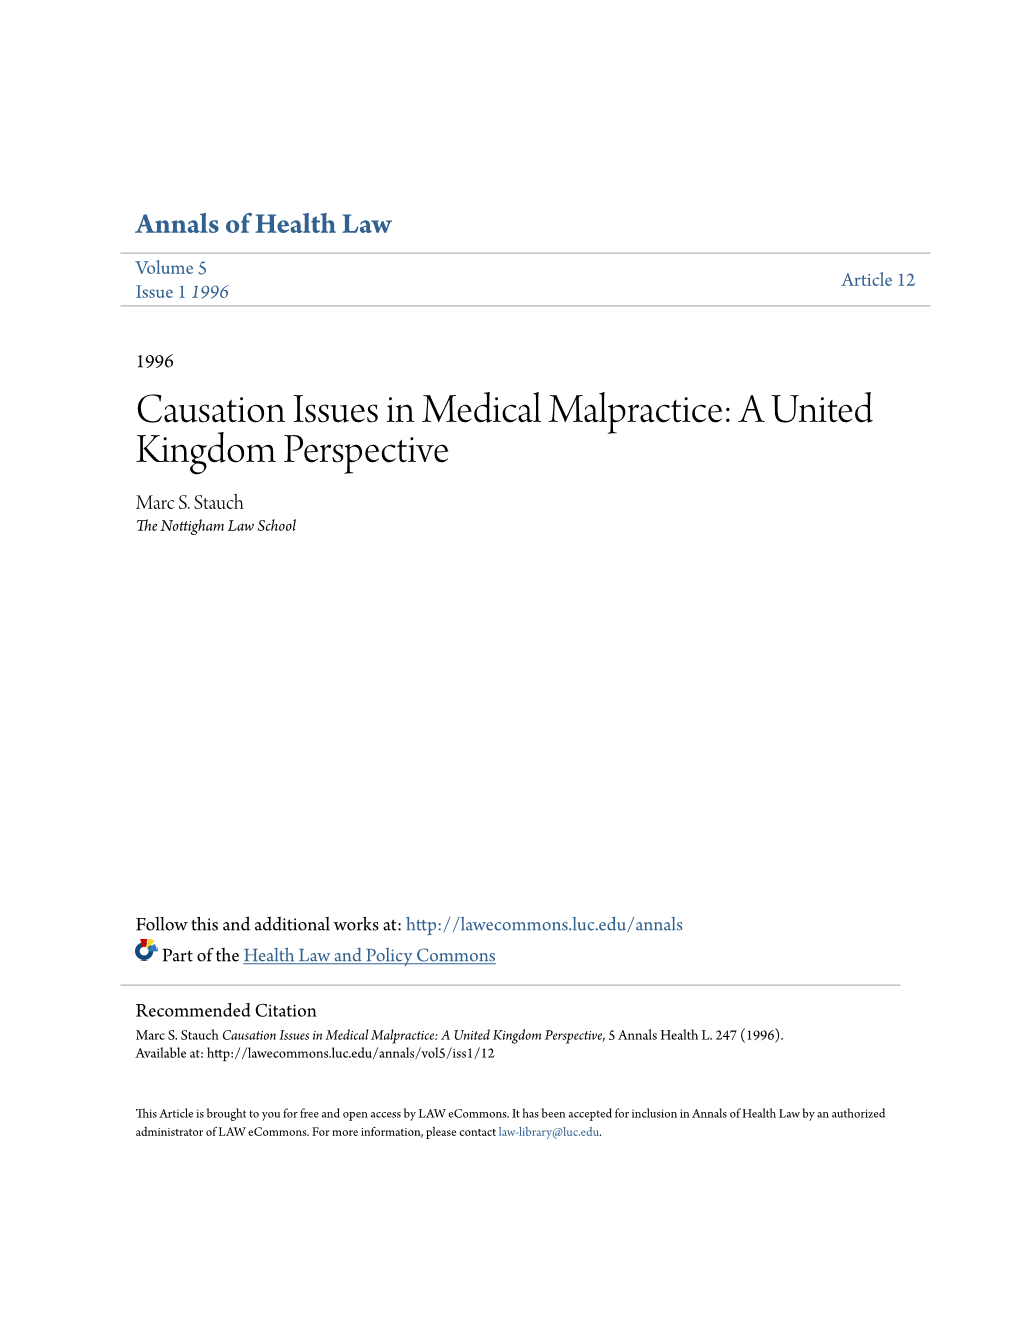 Causation Issues in Medical Malpractice: a United Kingdom Perspective Marc S